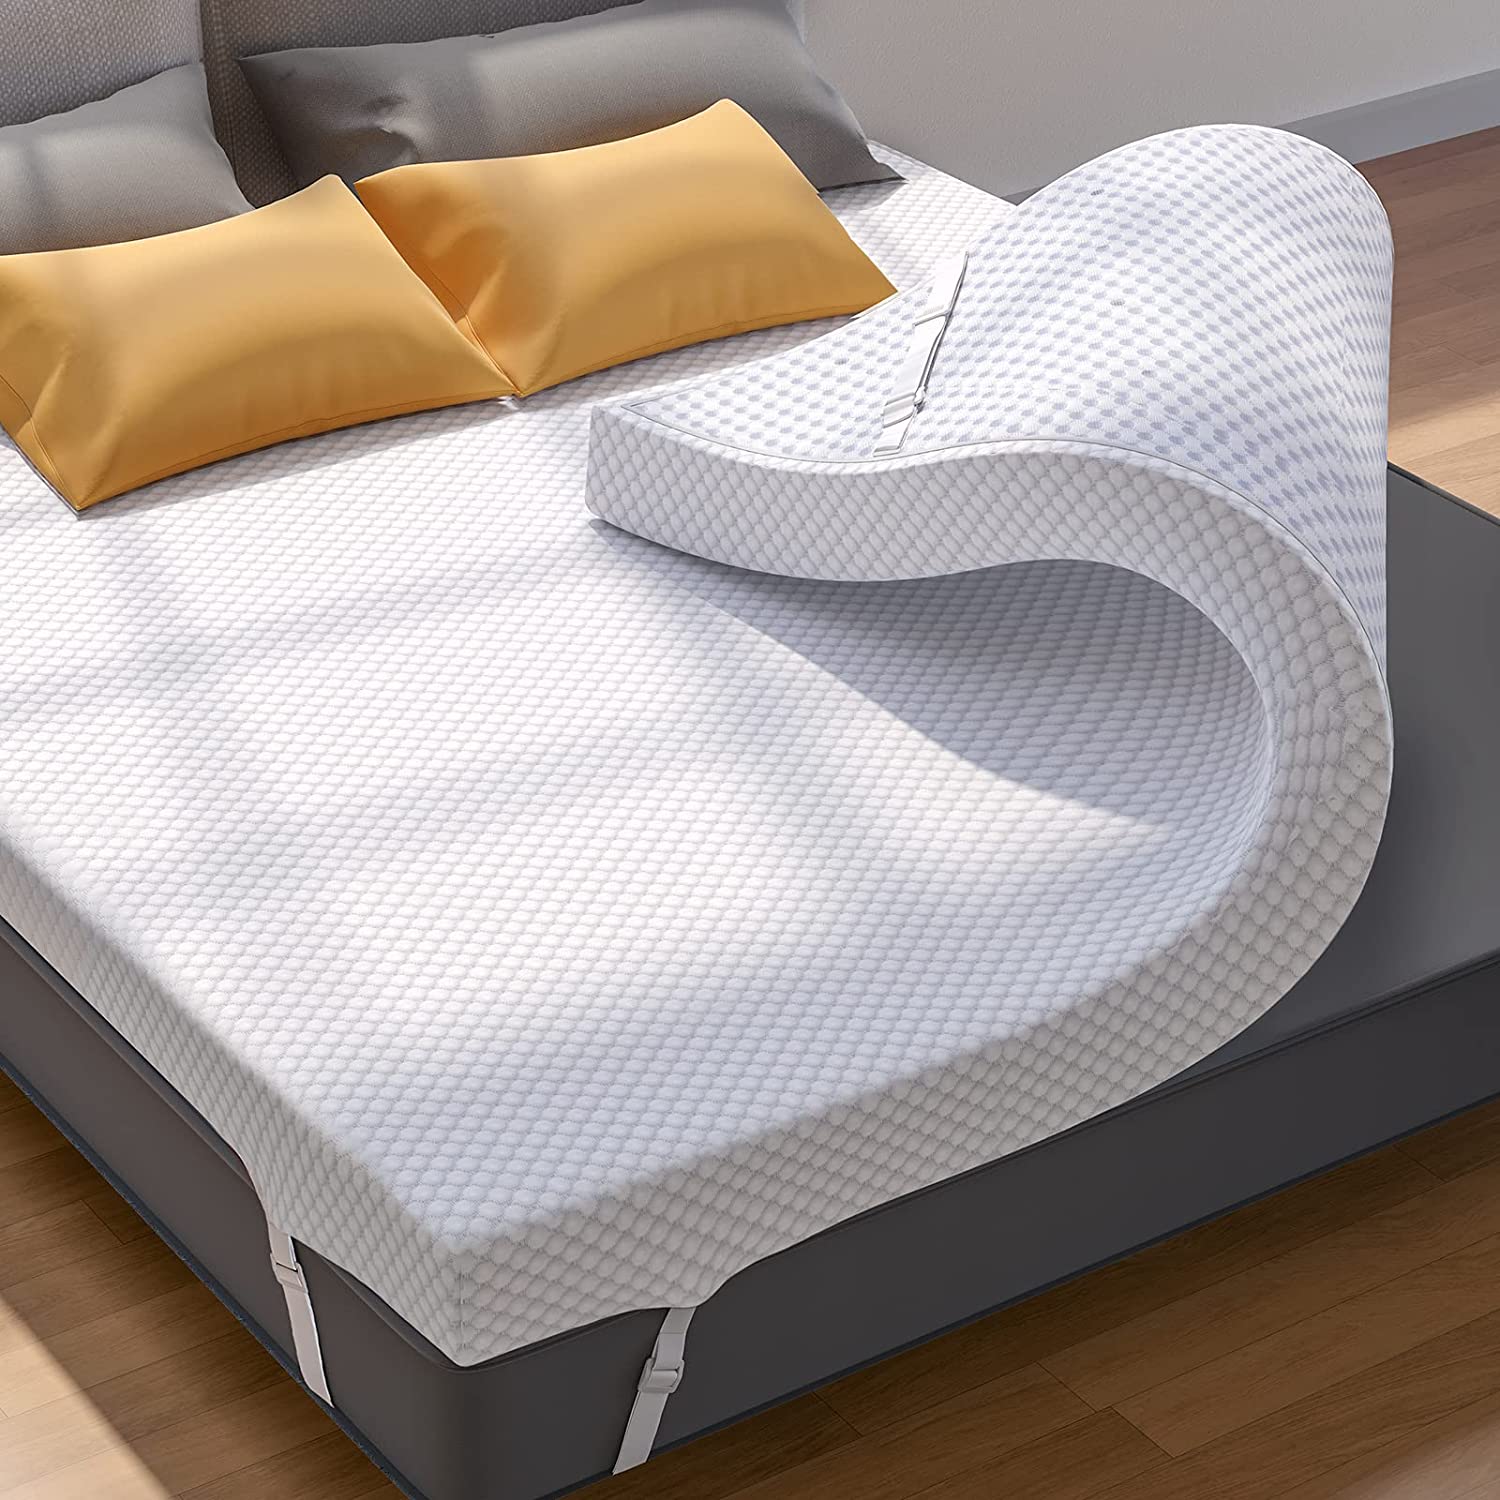 Top 4 Best Mattress Toppers Under $100 in 2023 [Reviewed]